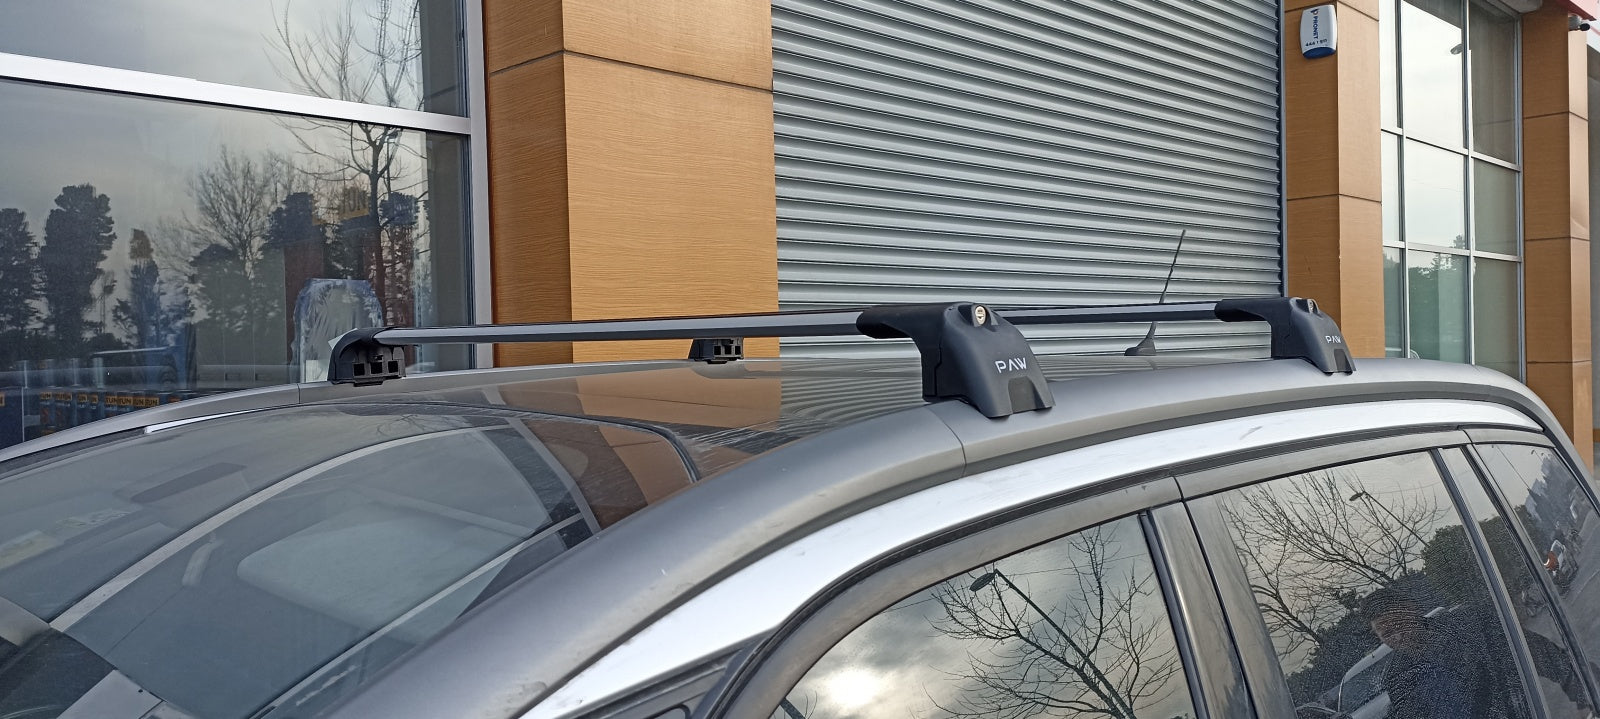 Citroën C4 Grand Picasso Mpv Roof Rack Cross Bars Flush Roof Silver 2013- Up